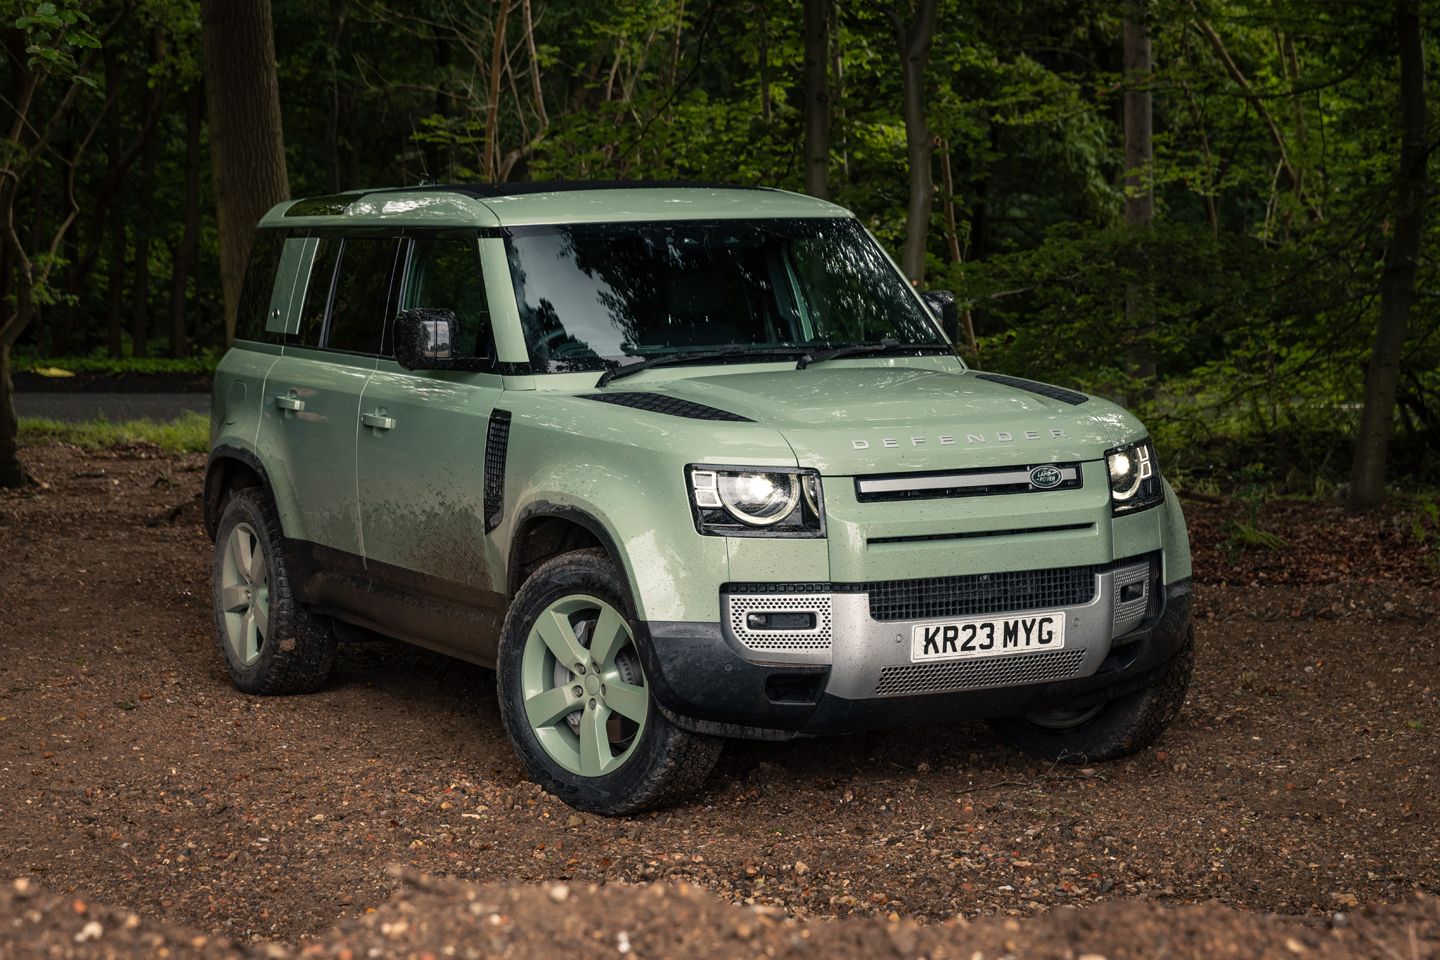 Land Rover Defender 75th Limited Edition celebrates the iconic off